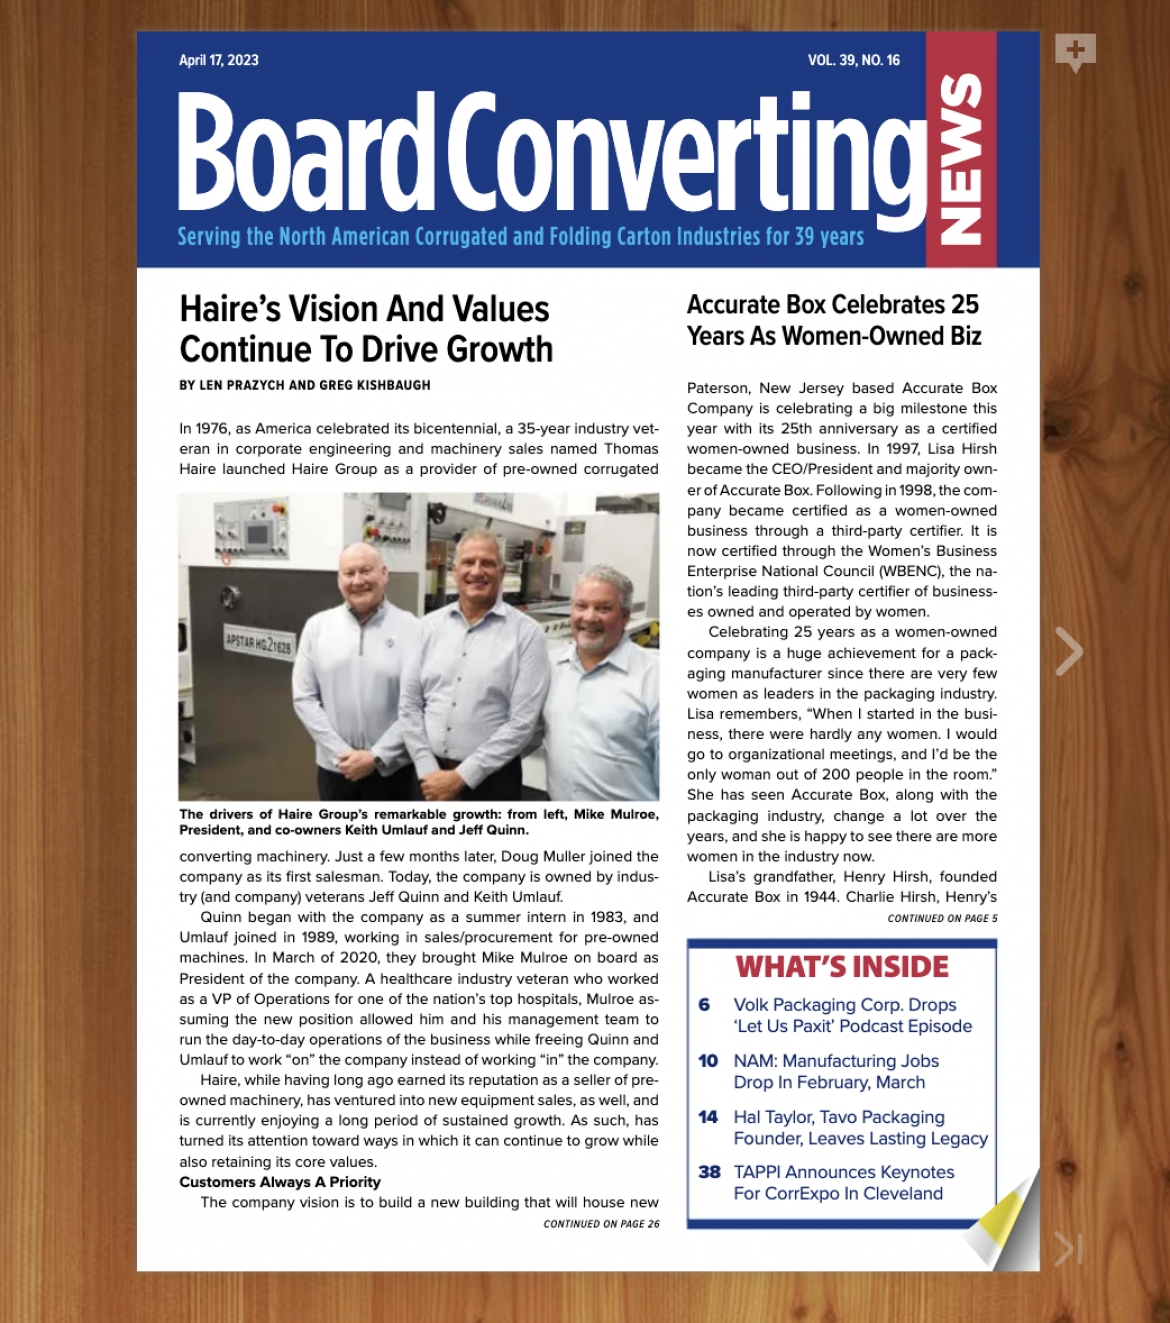 Haire’s Vision And Values Continue To Drive Growth - Board Converting News